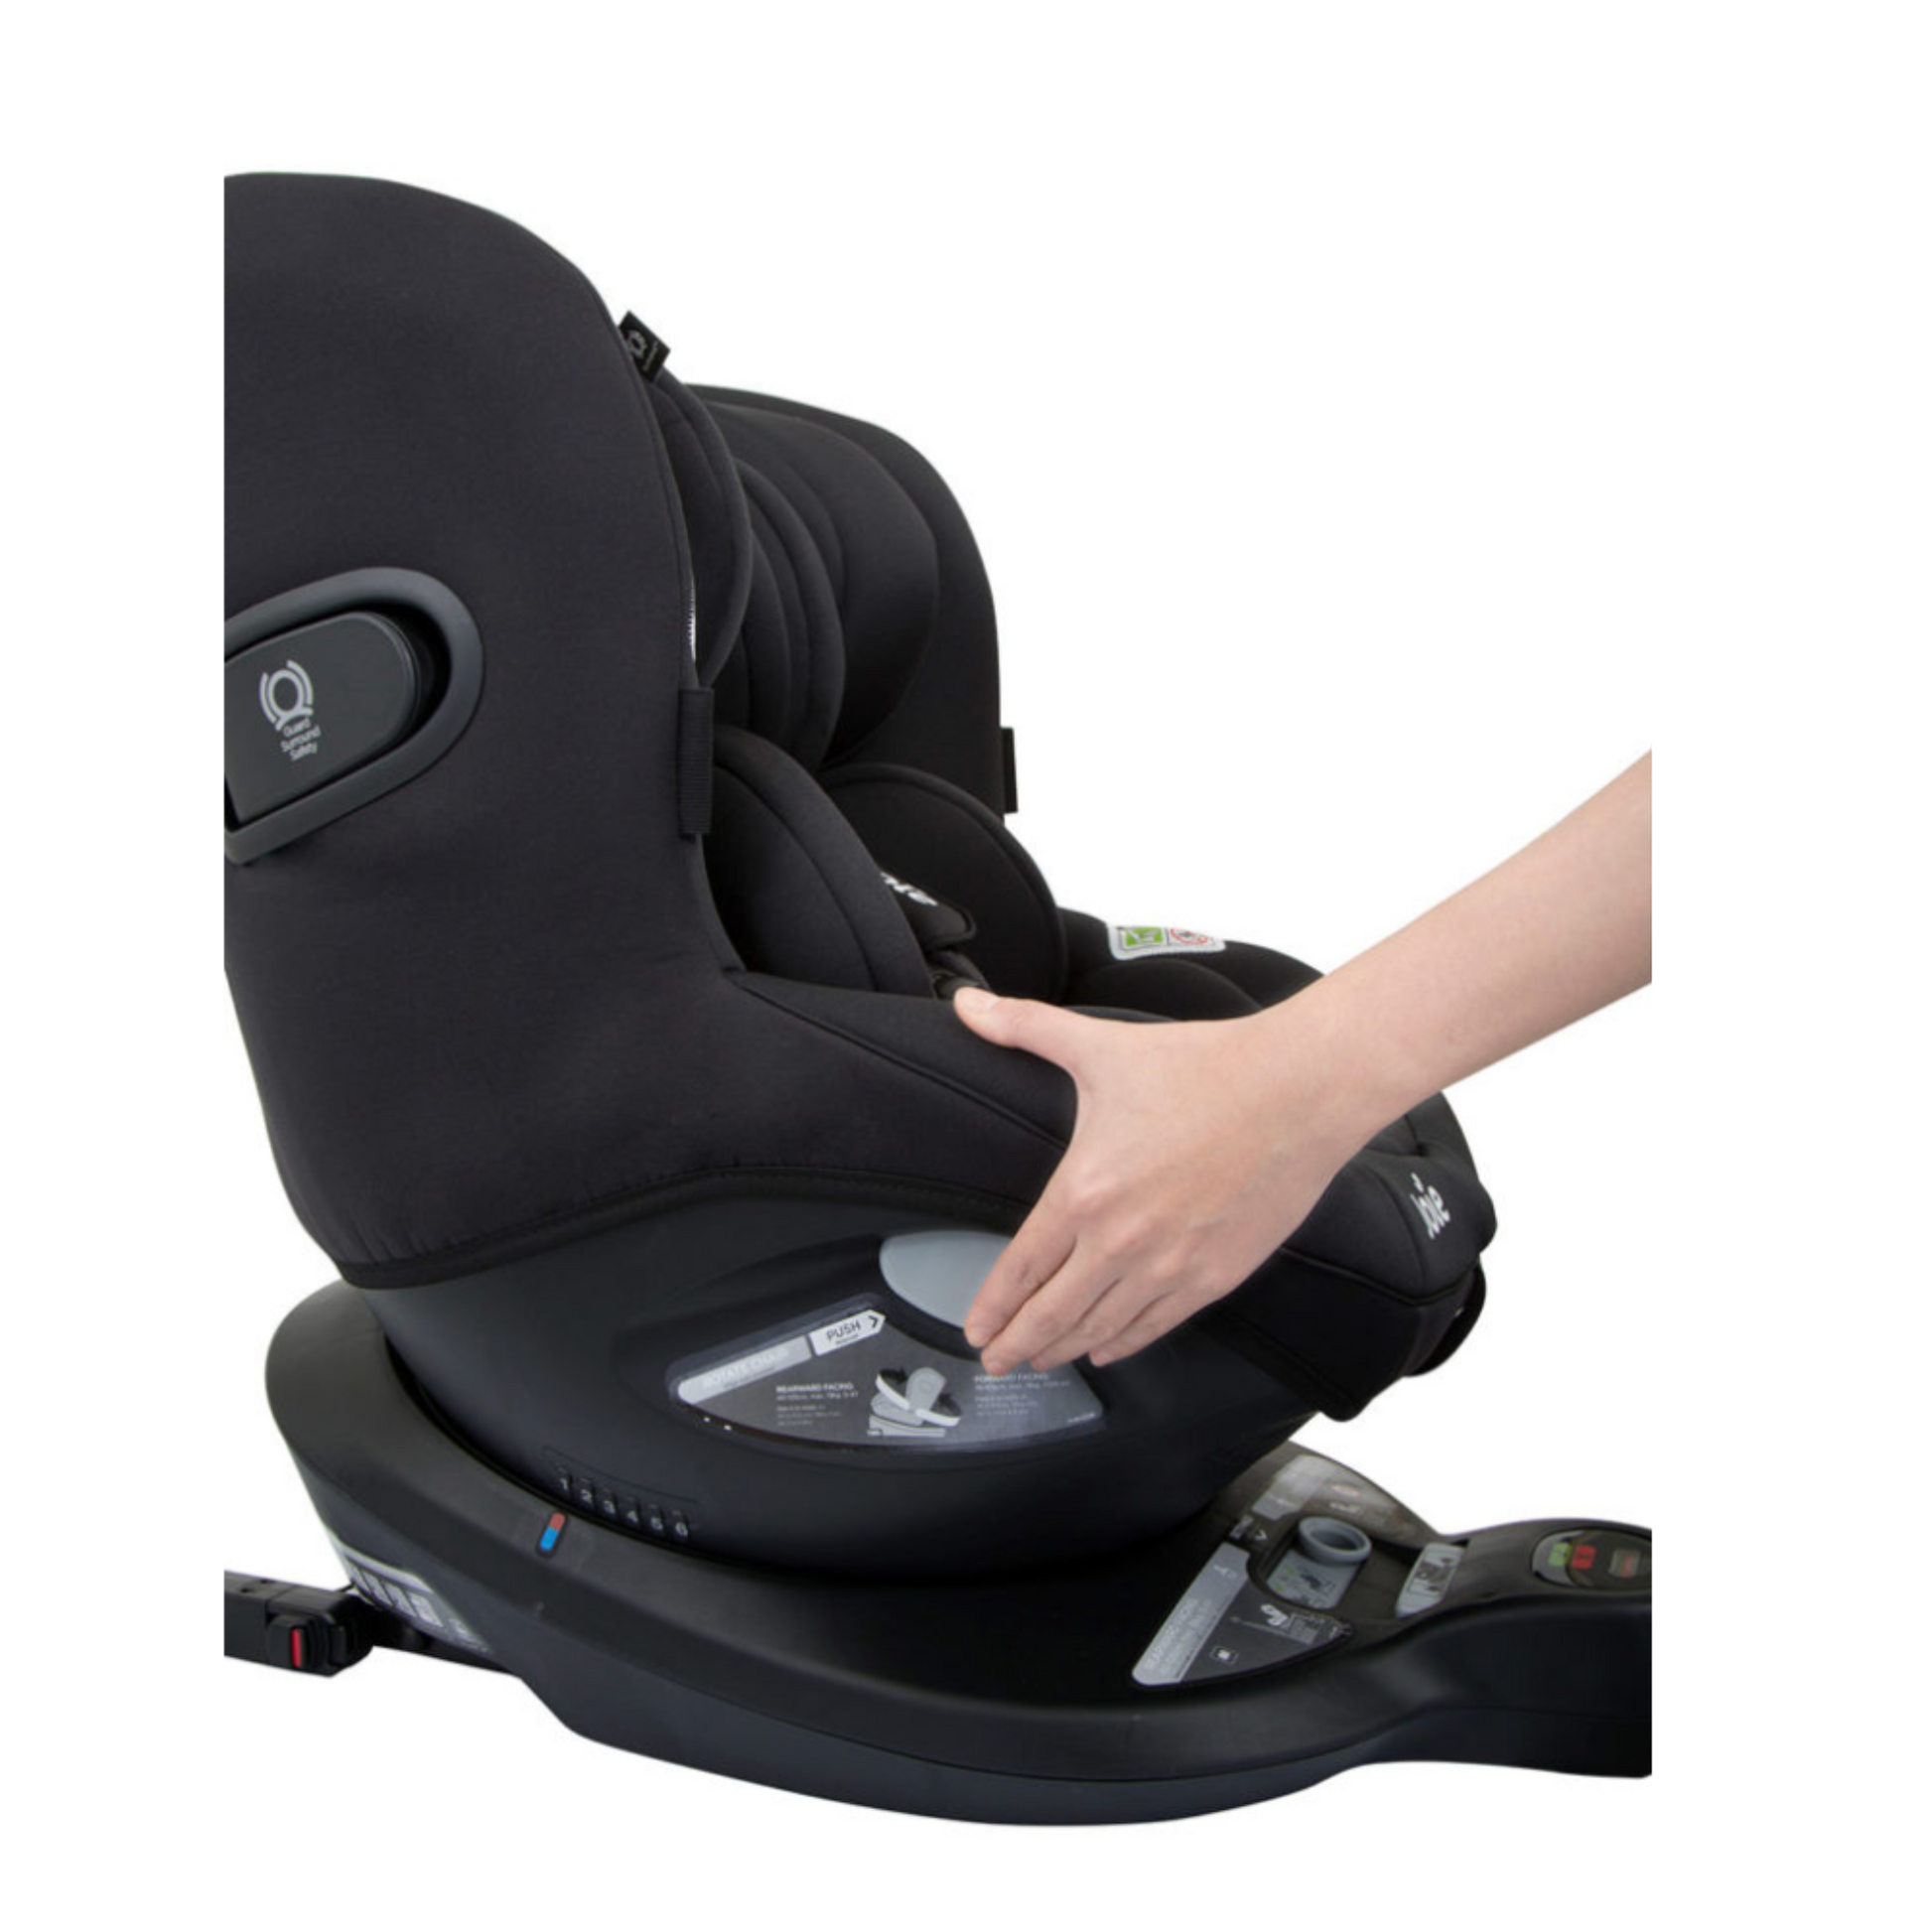 Joie Baby Spin 360 Group 0+/1 Car Seat, Ember